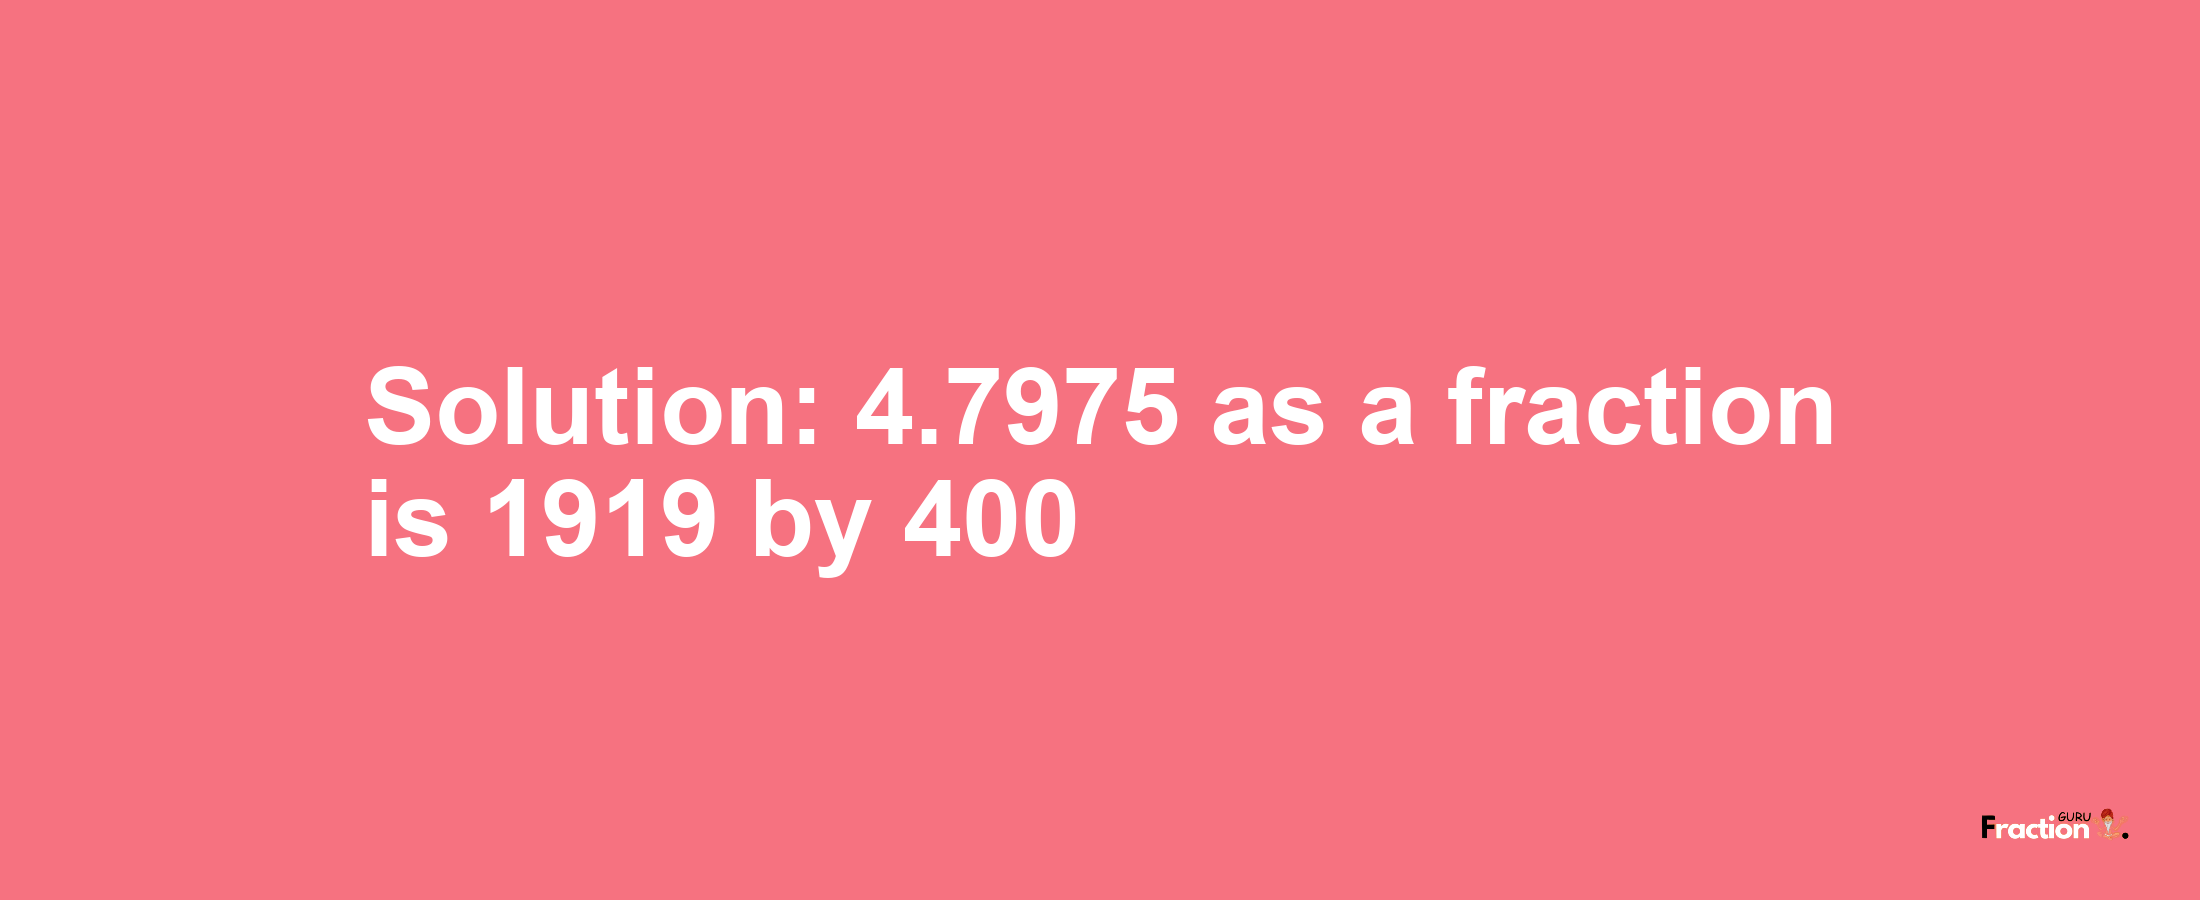 Solution:4.7975 as a fraction is 1919/400